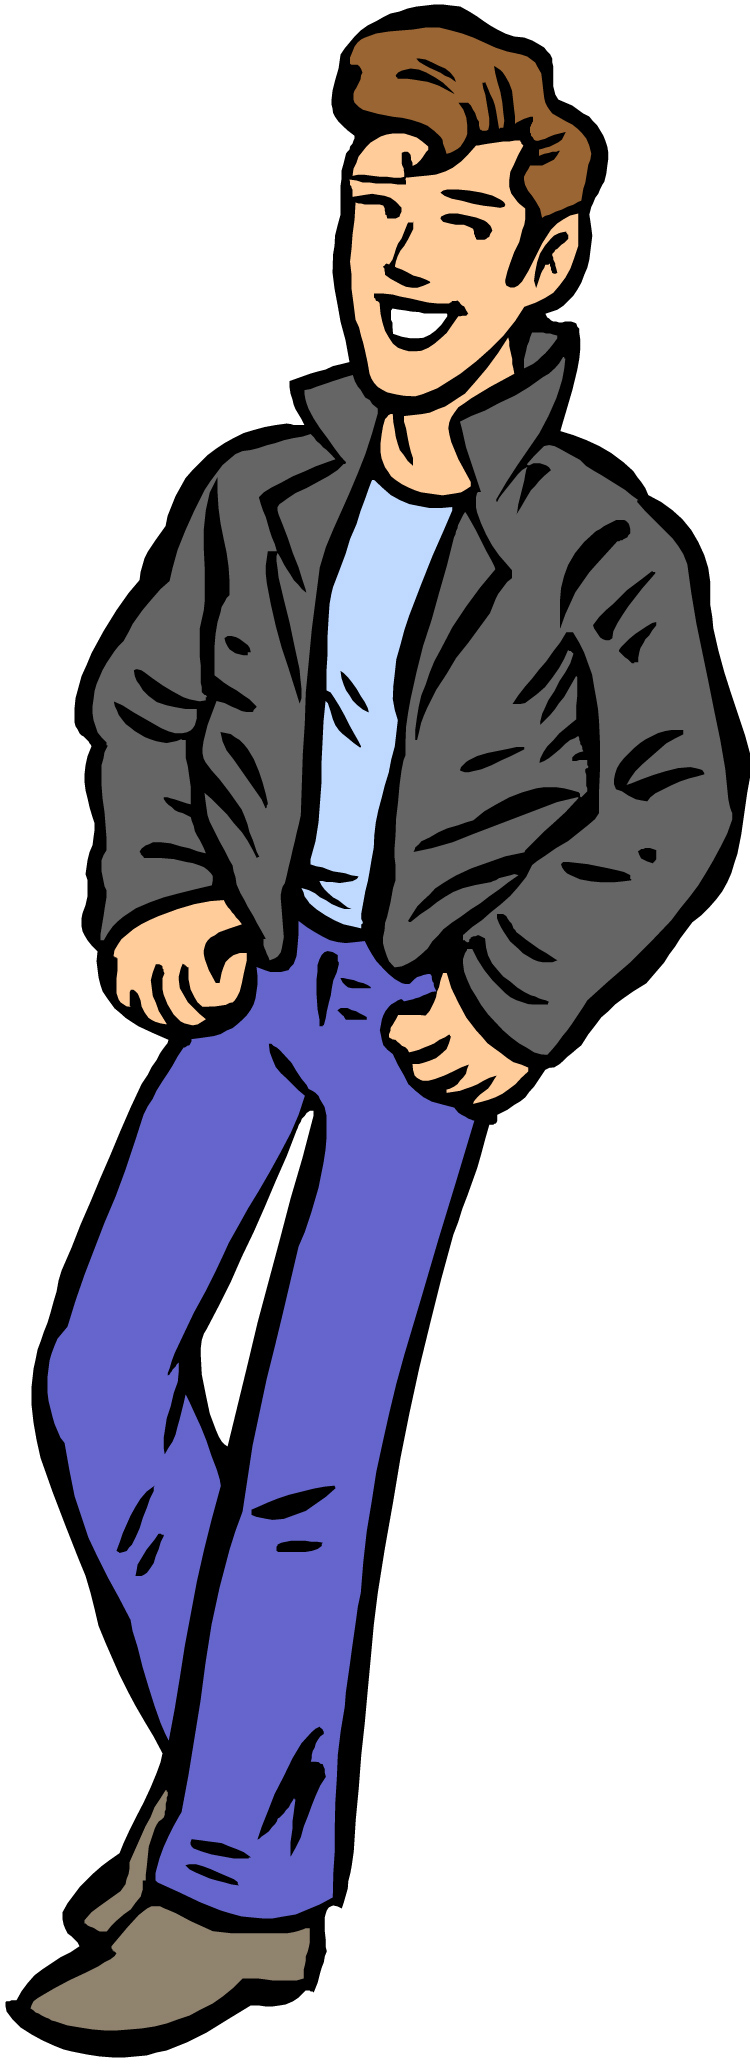 Cool guy clipart kid